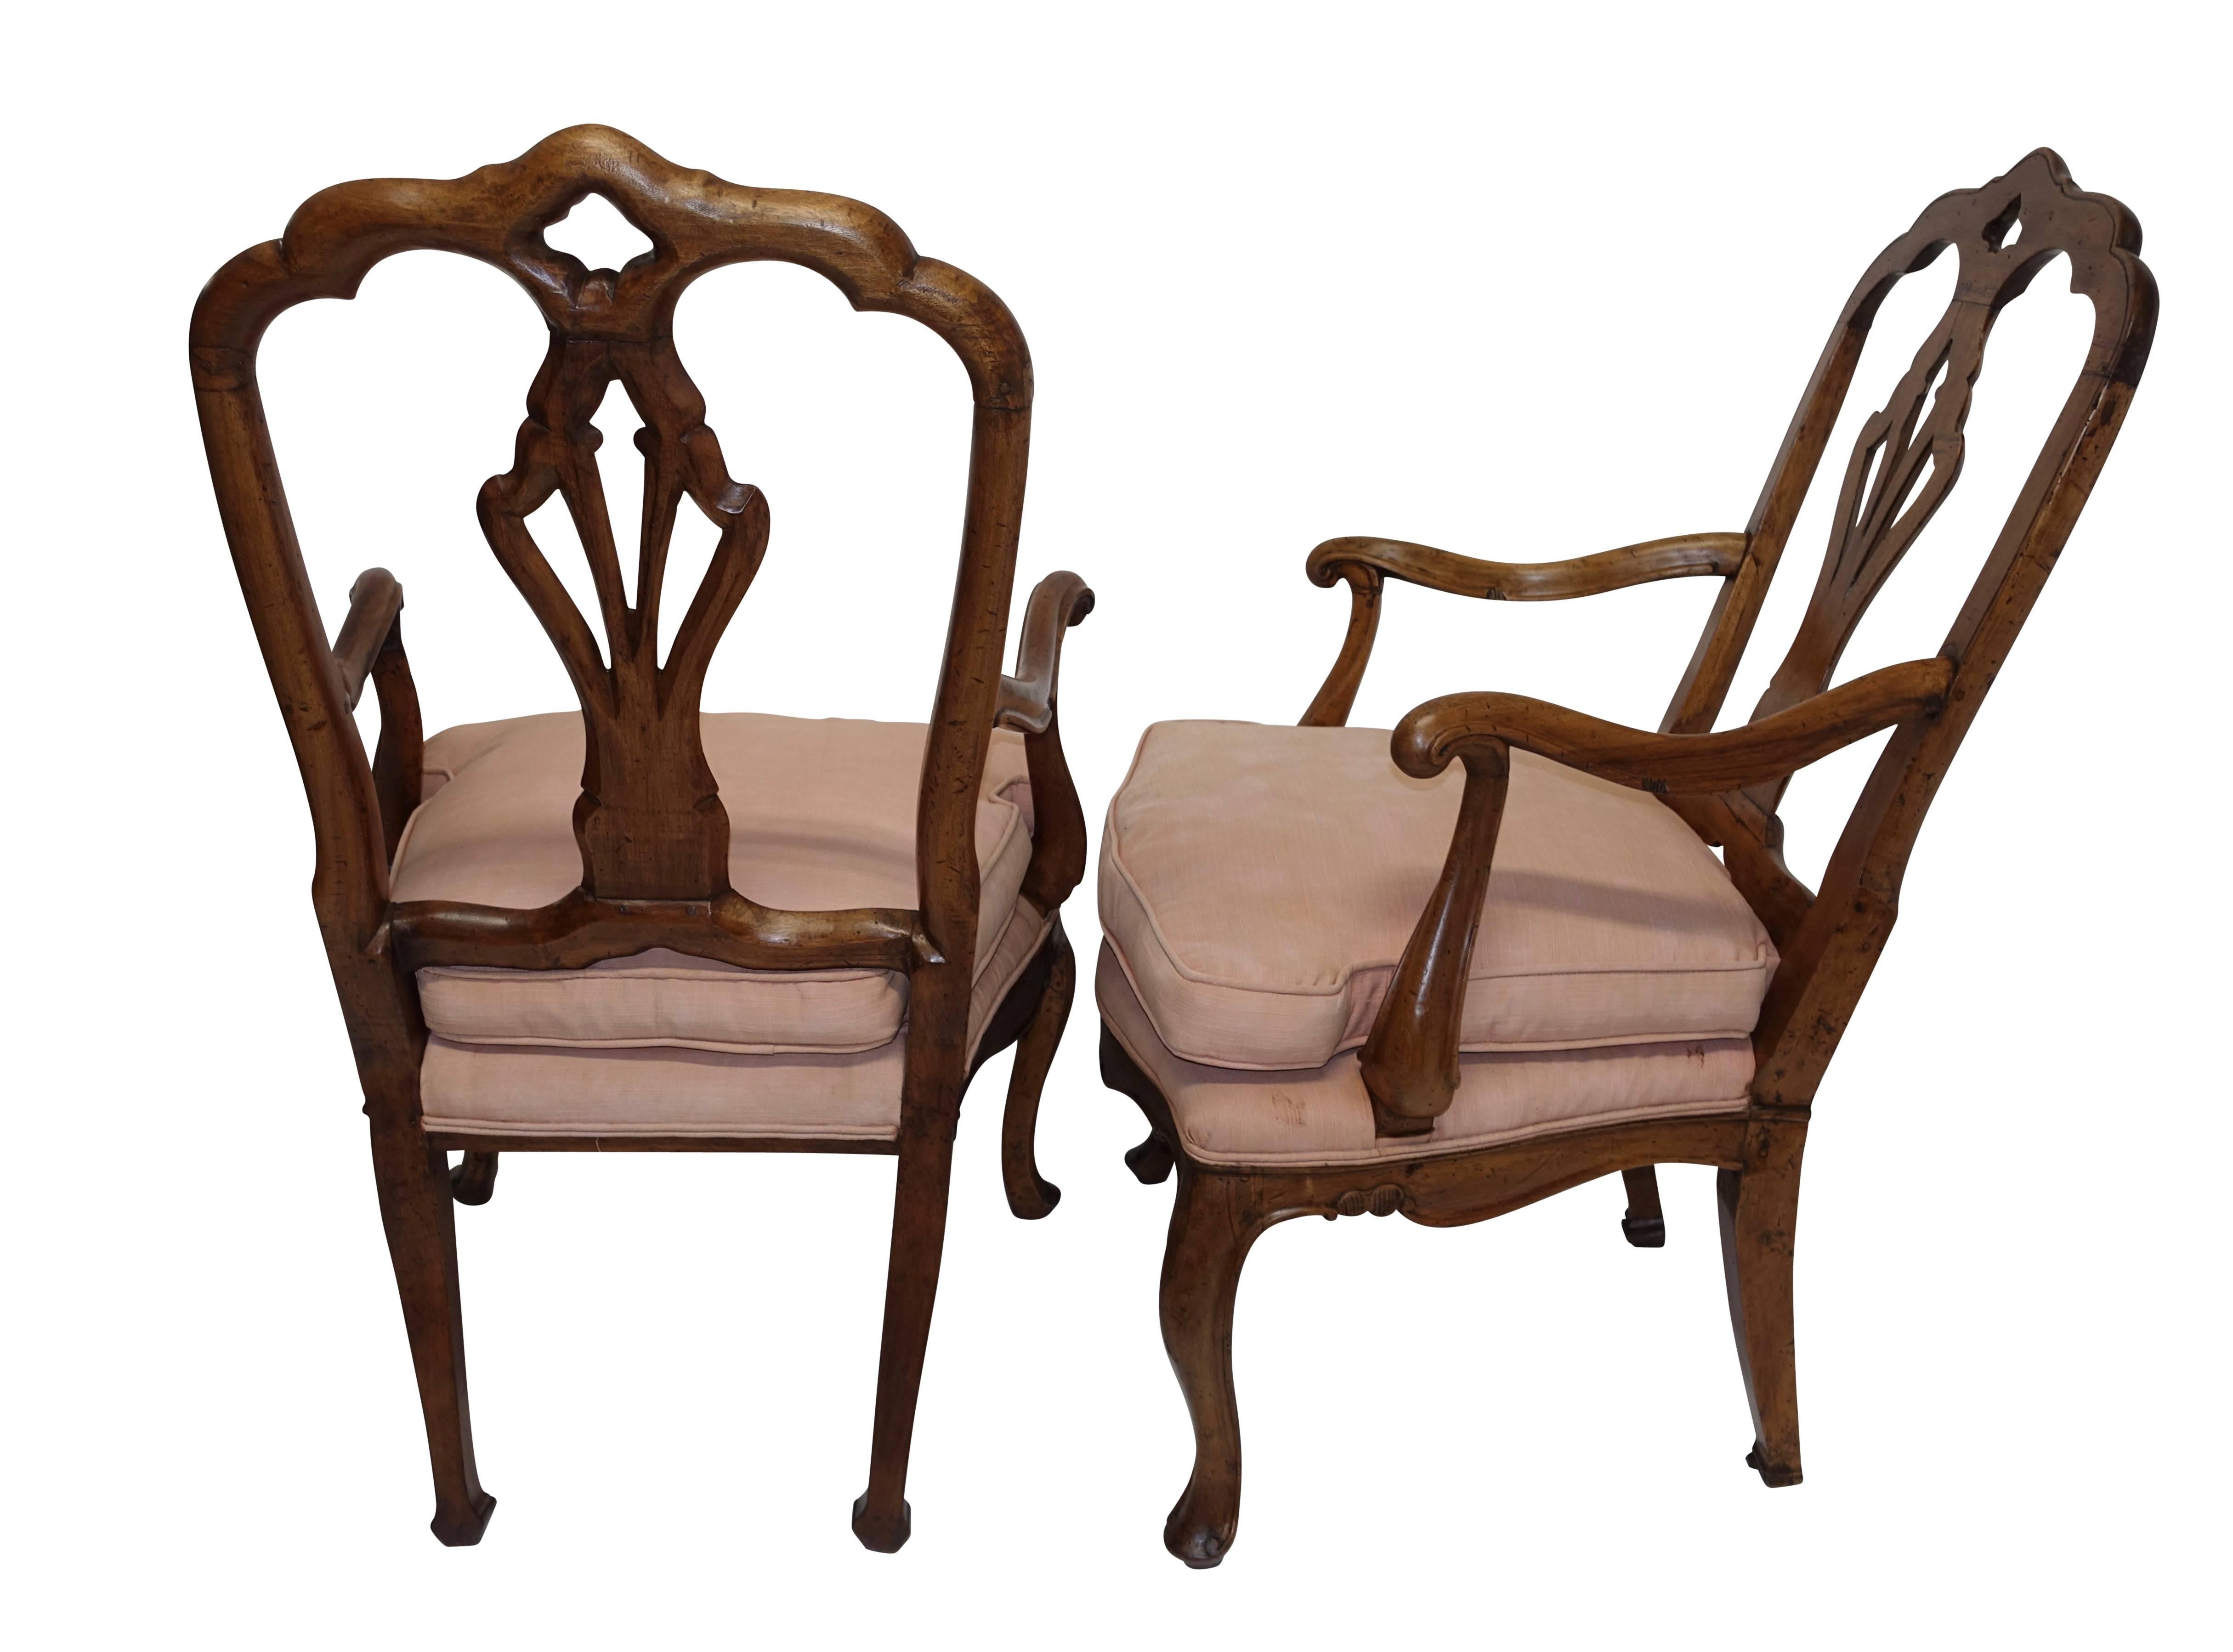 Polished Pair of Walnut Carved Armchairs Italian 19th Century